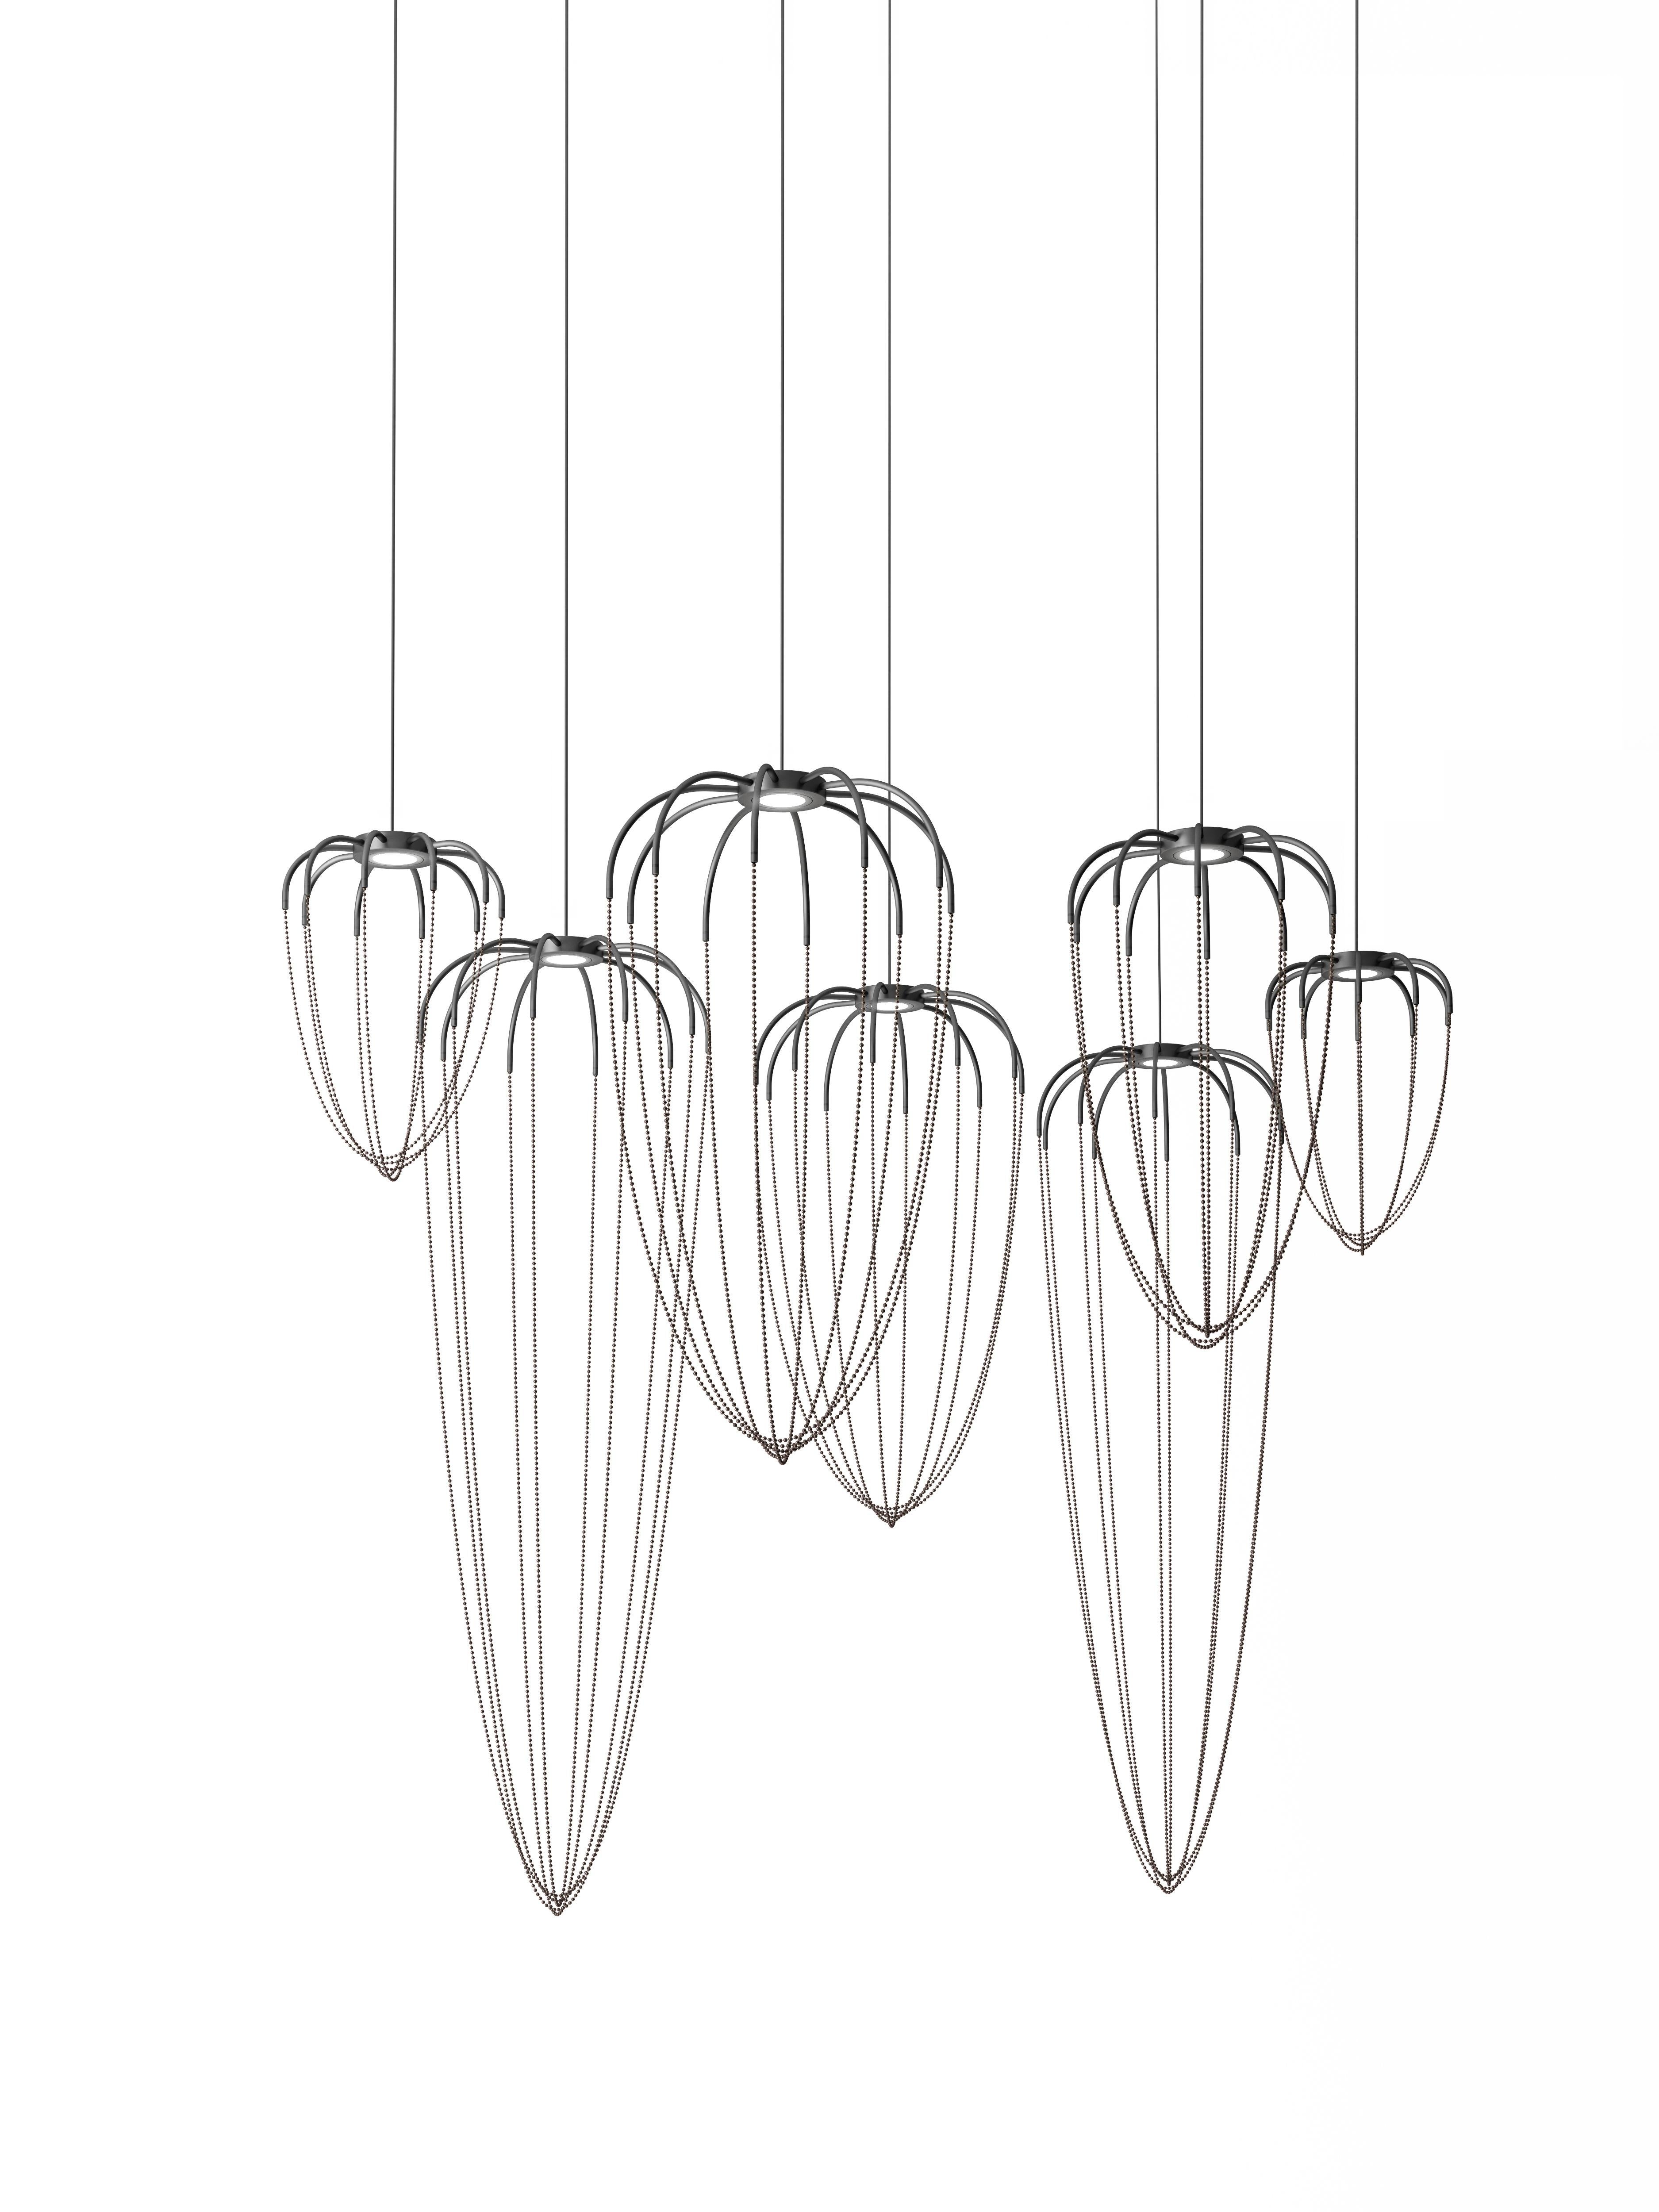 Axolight Alysoid Large Pendant Lamp in Anthracite Grey Aluminum Body with Nickel Chains by Ryosuke Fukusada

Precious spherical details chase each other with soft elegance and compose open signs in space. The refined volume of Alysoid lets itself be